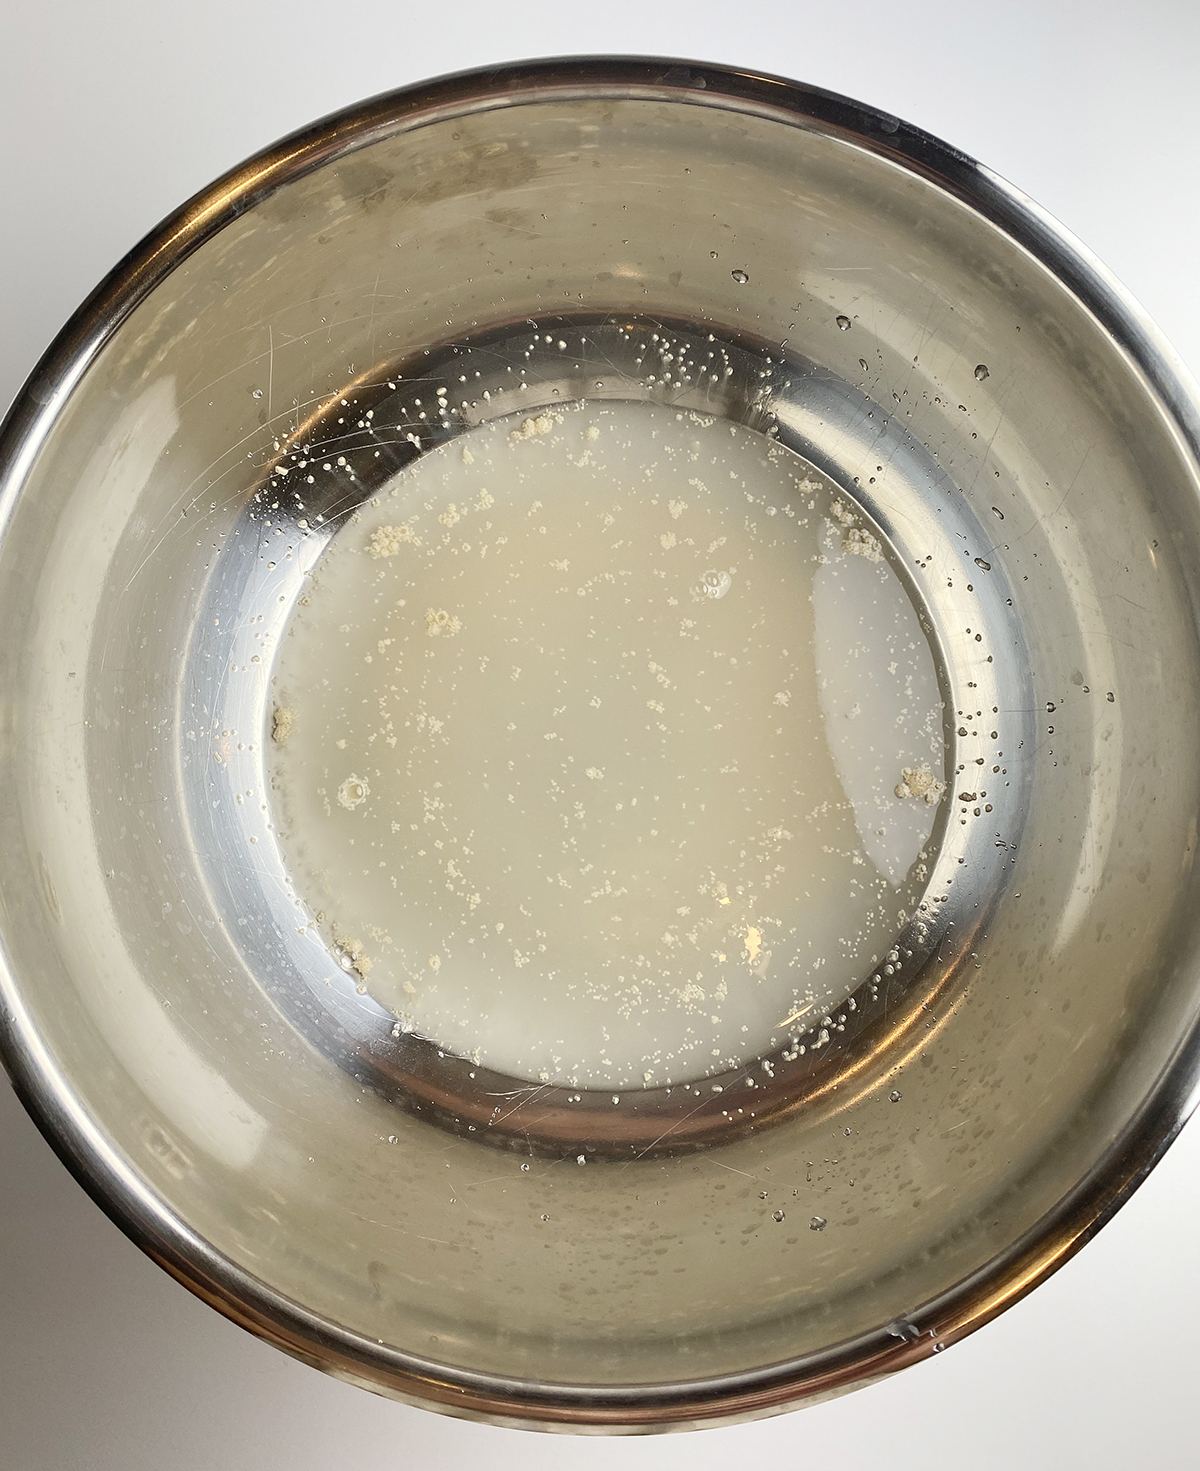 Yeast sugar and water mixture in a bowl.